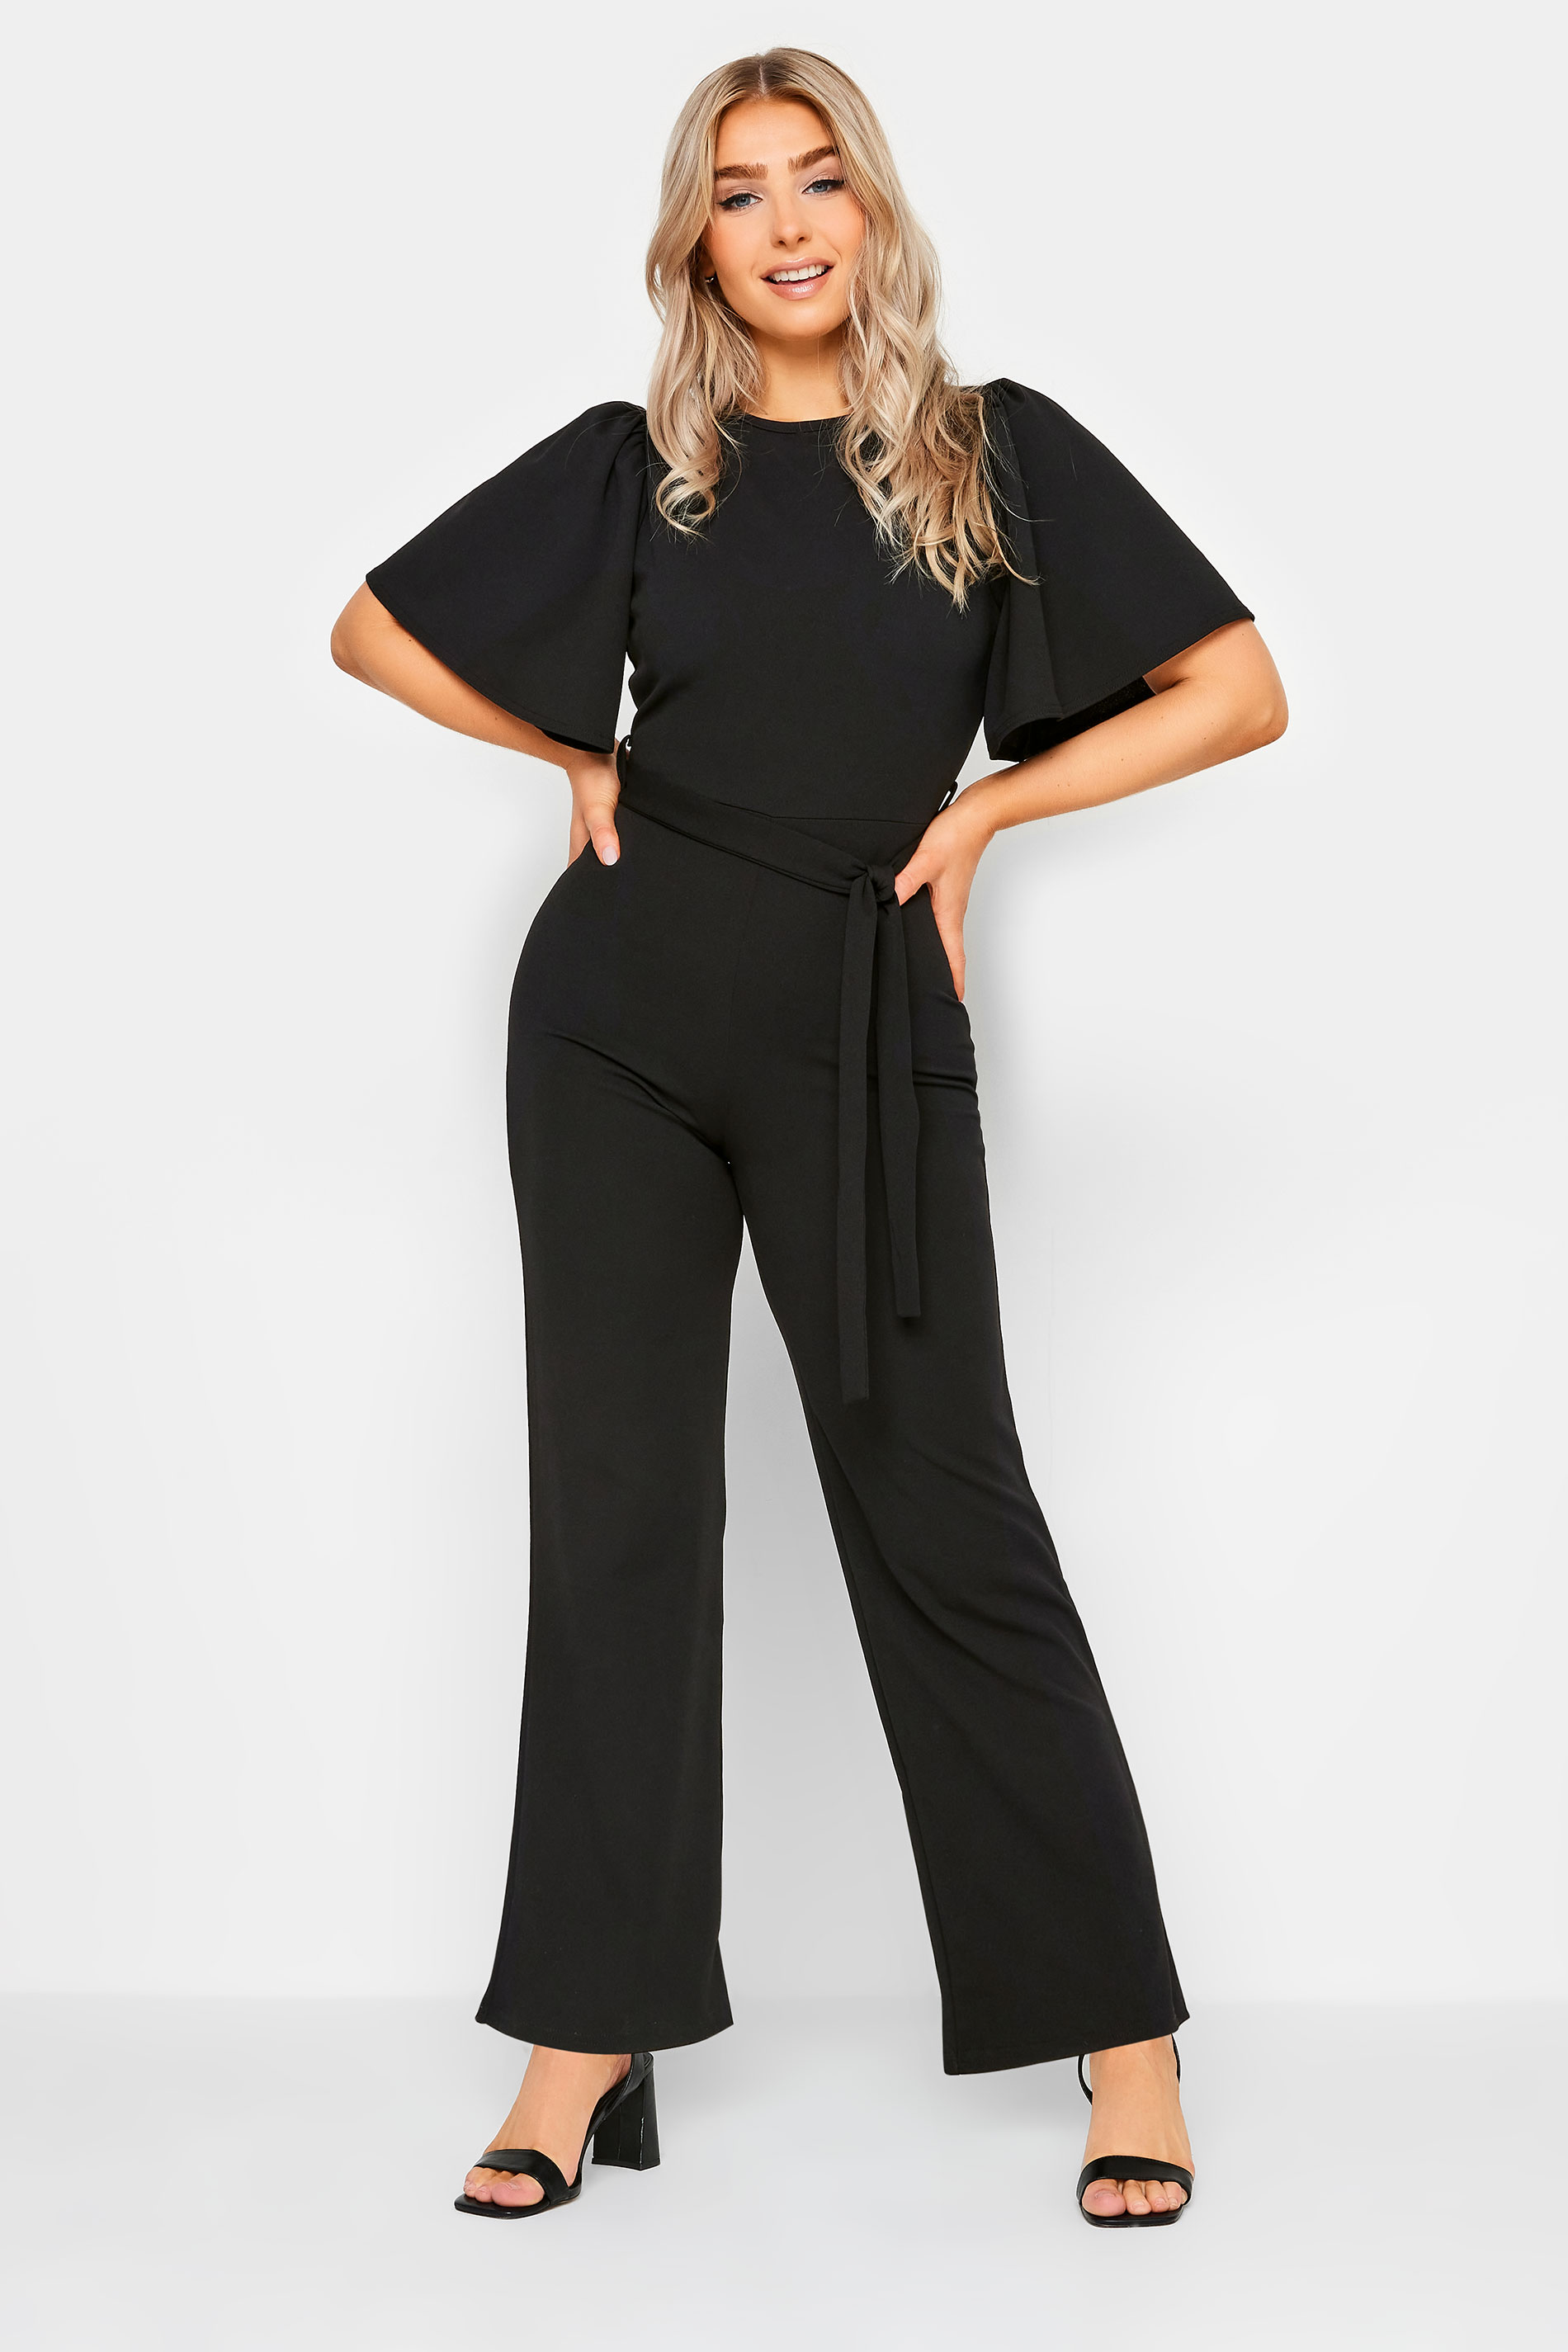 The Complete Jumpsuit Guide for Women With Short Legs - Petite Dressing